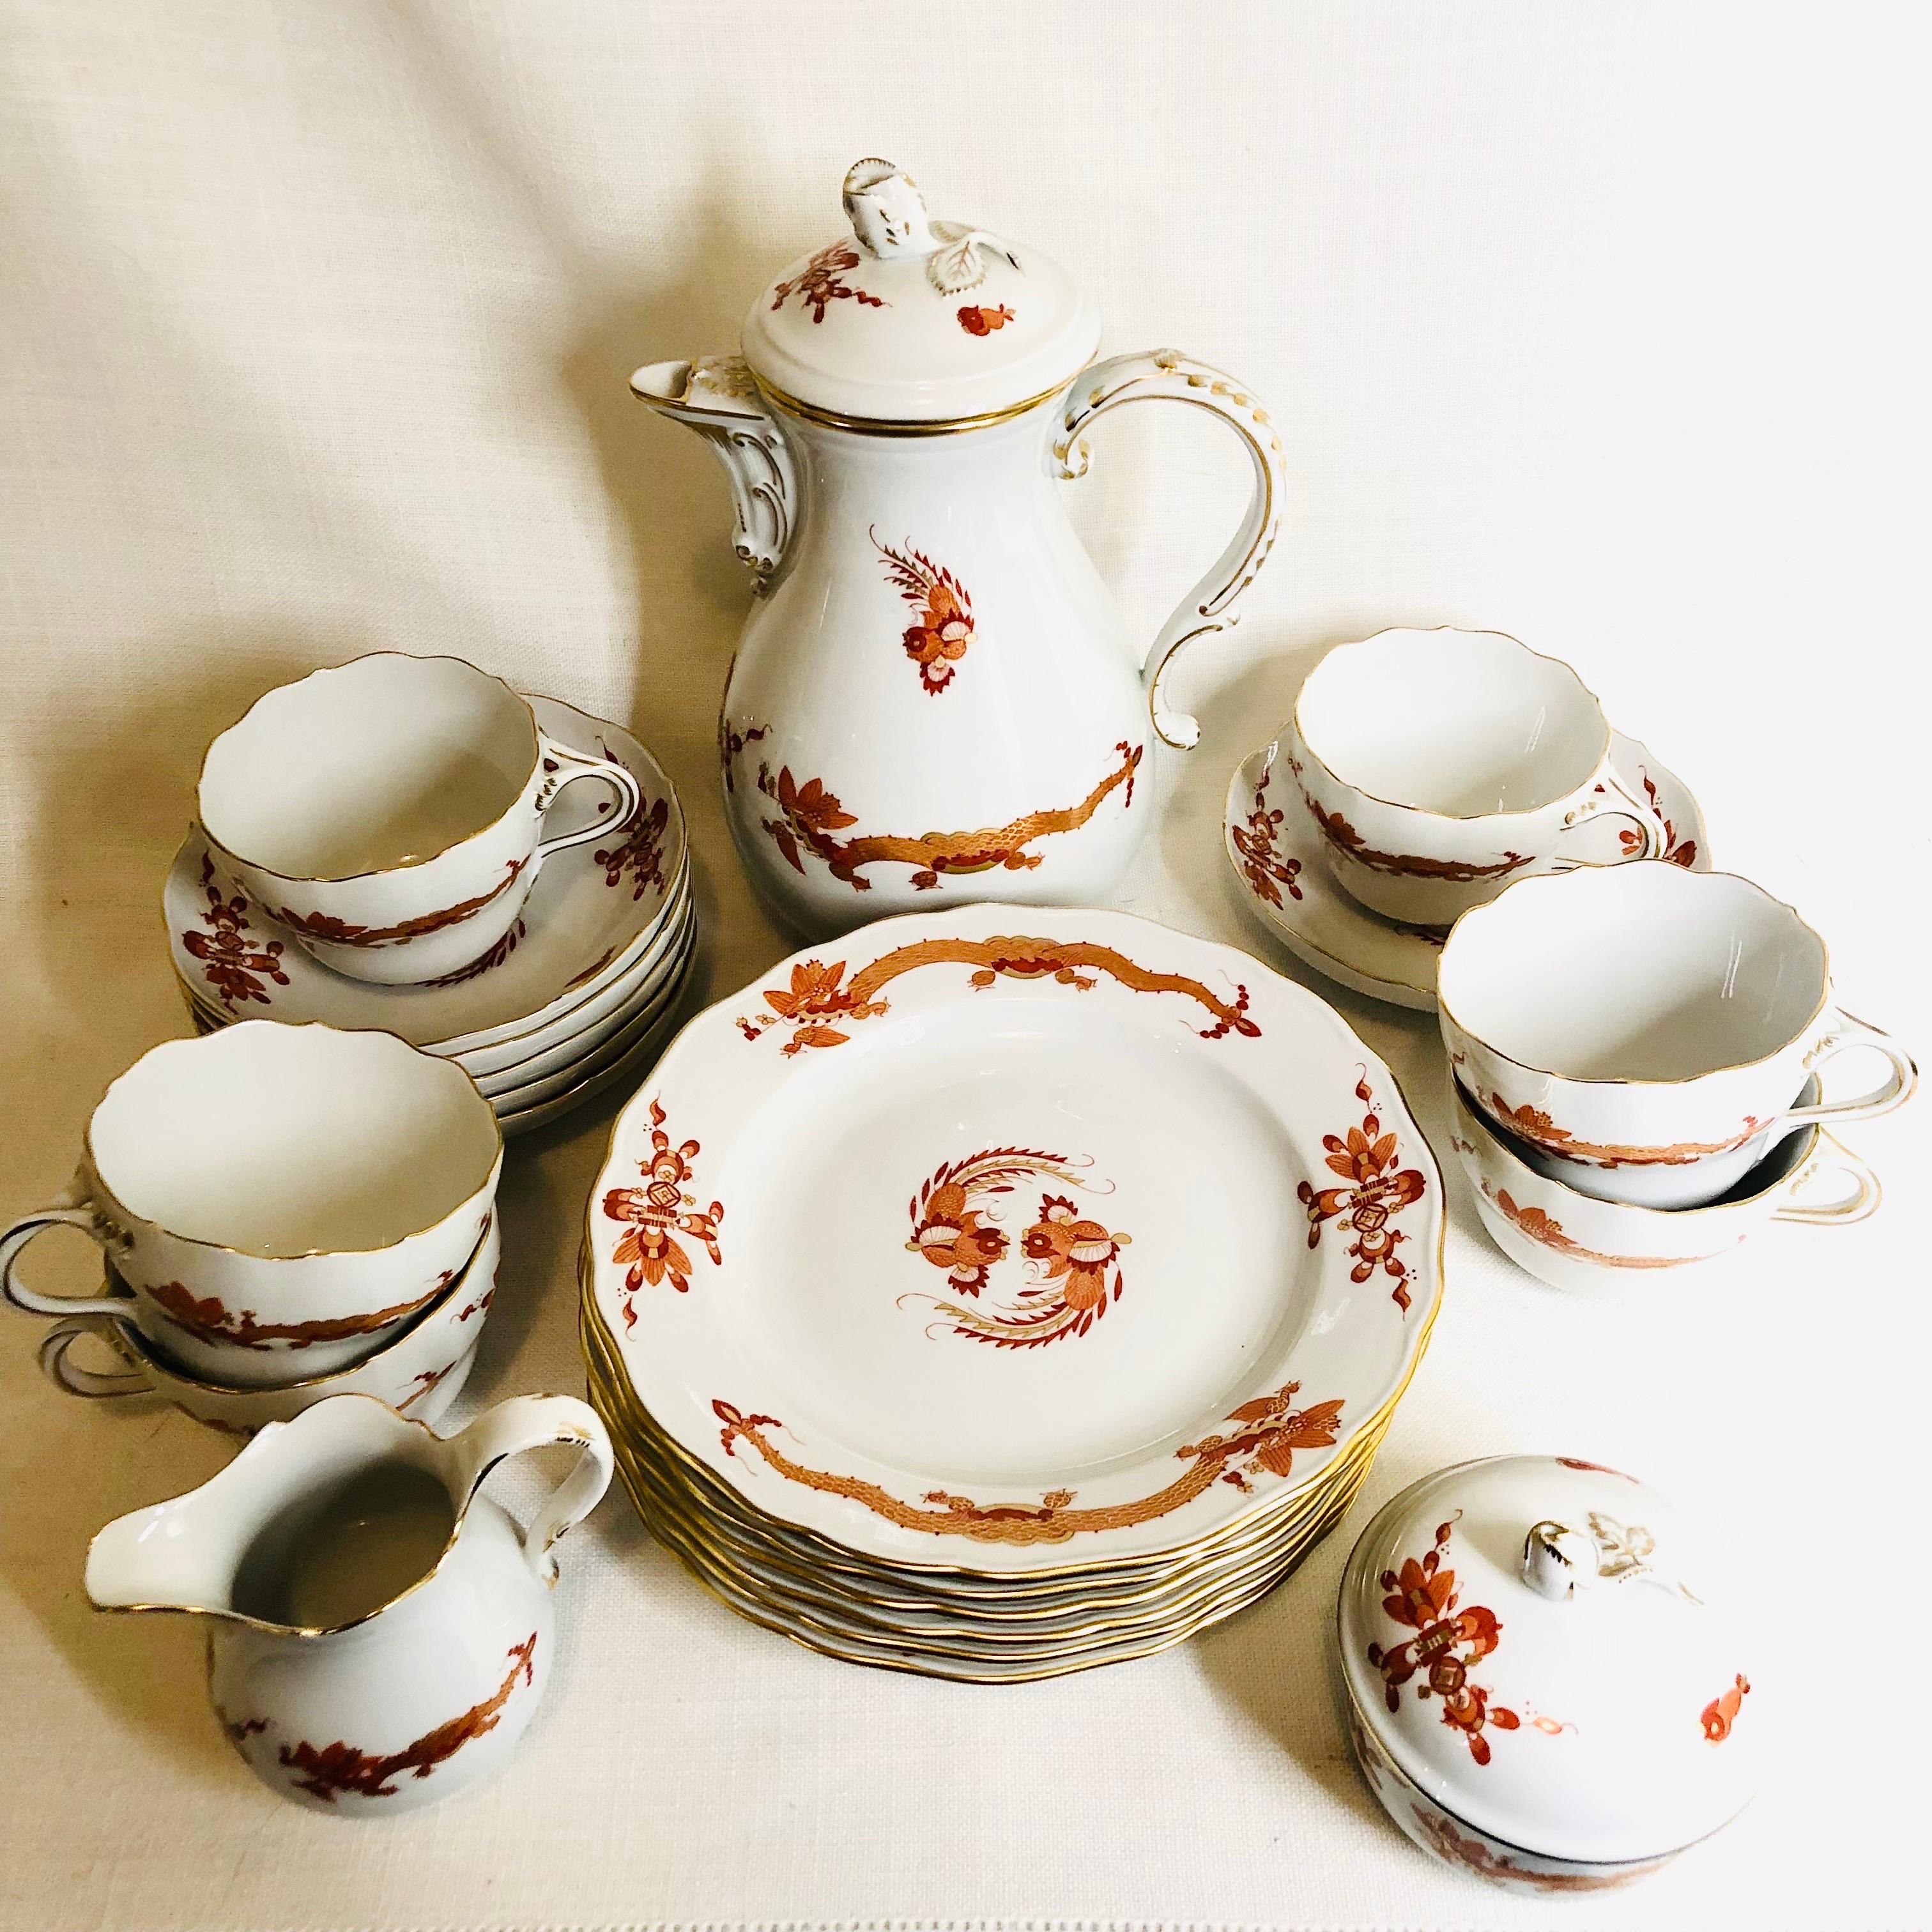 This is a fabulous Meissen rich court dragon tea or coffee set, which includes a tea or coffee pot, a sugar and creamer, six cake plates and six cups and saucers. Both the pot and the covered sugar have raised roses on their covers. All these pieces